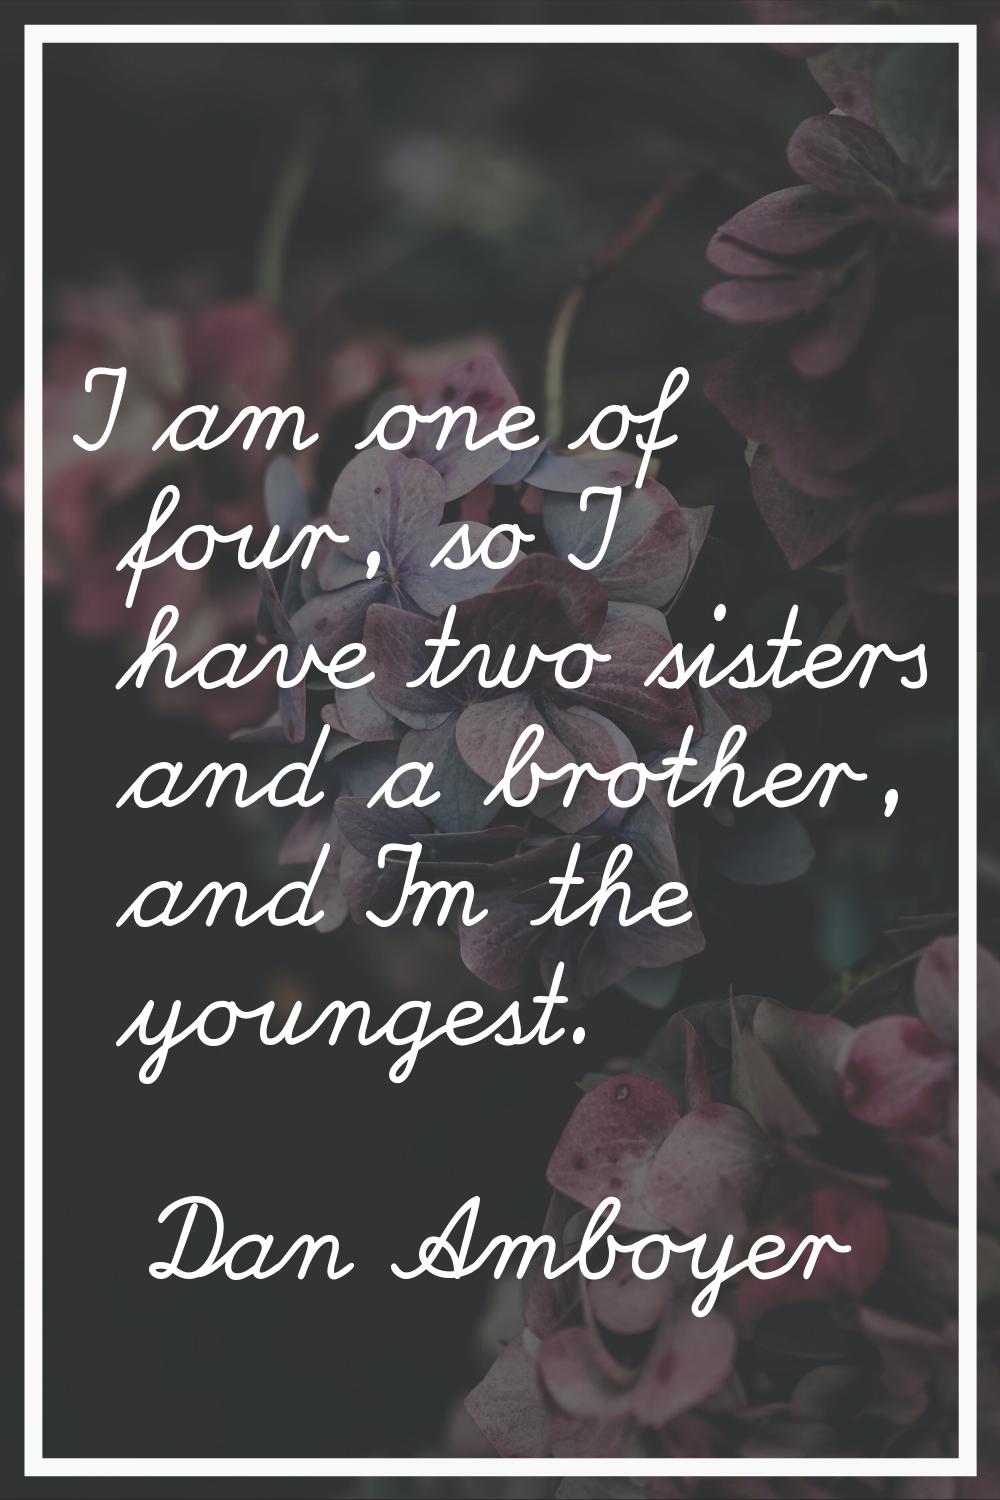 I am one of four, so I have two sisters and a brother, and I'm the youngest.